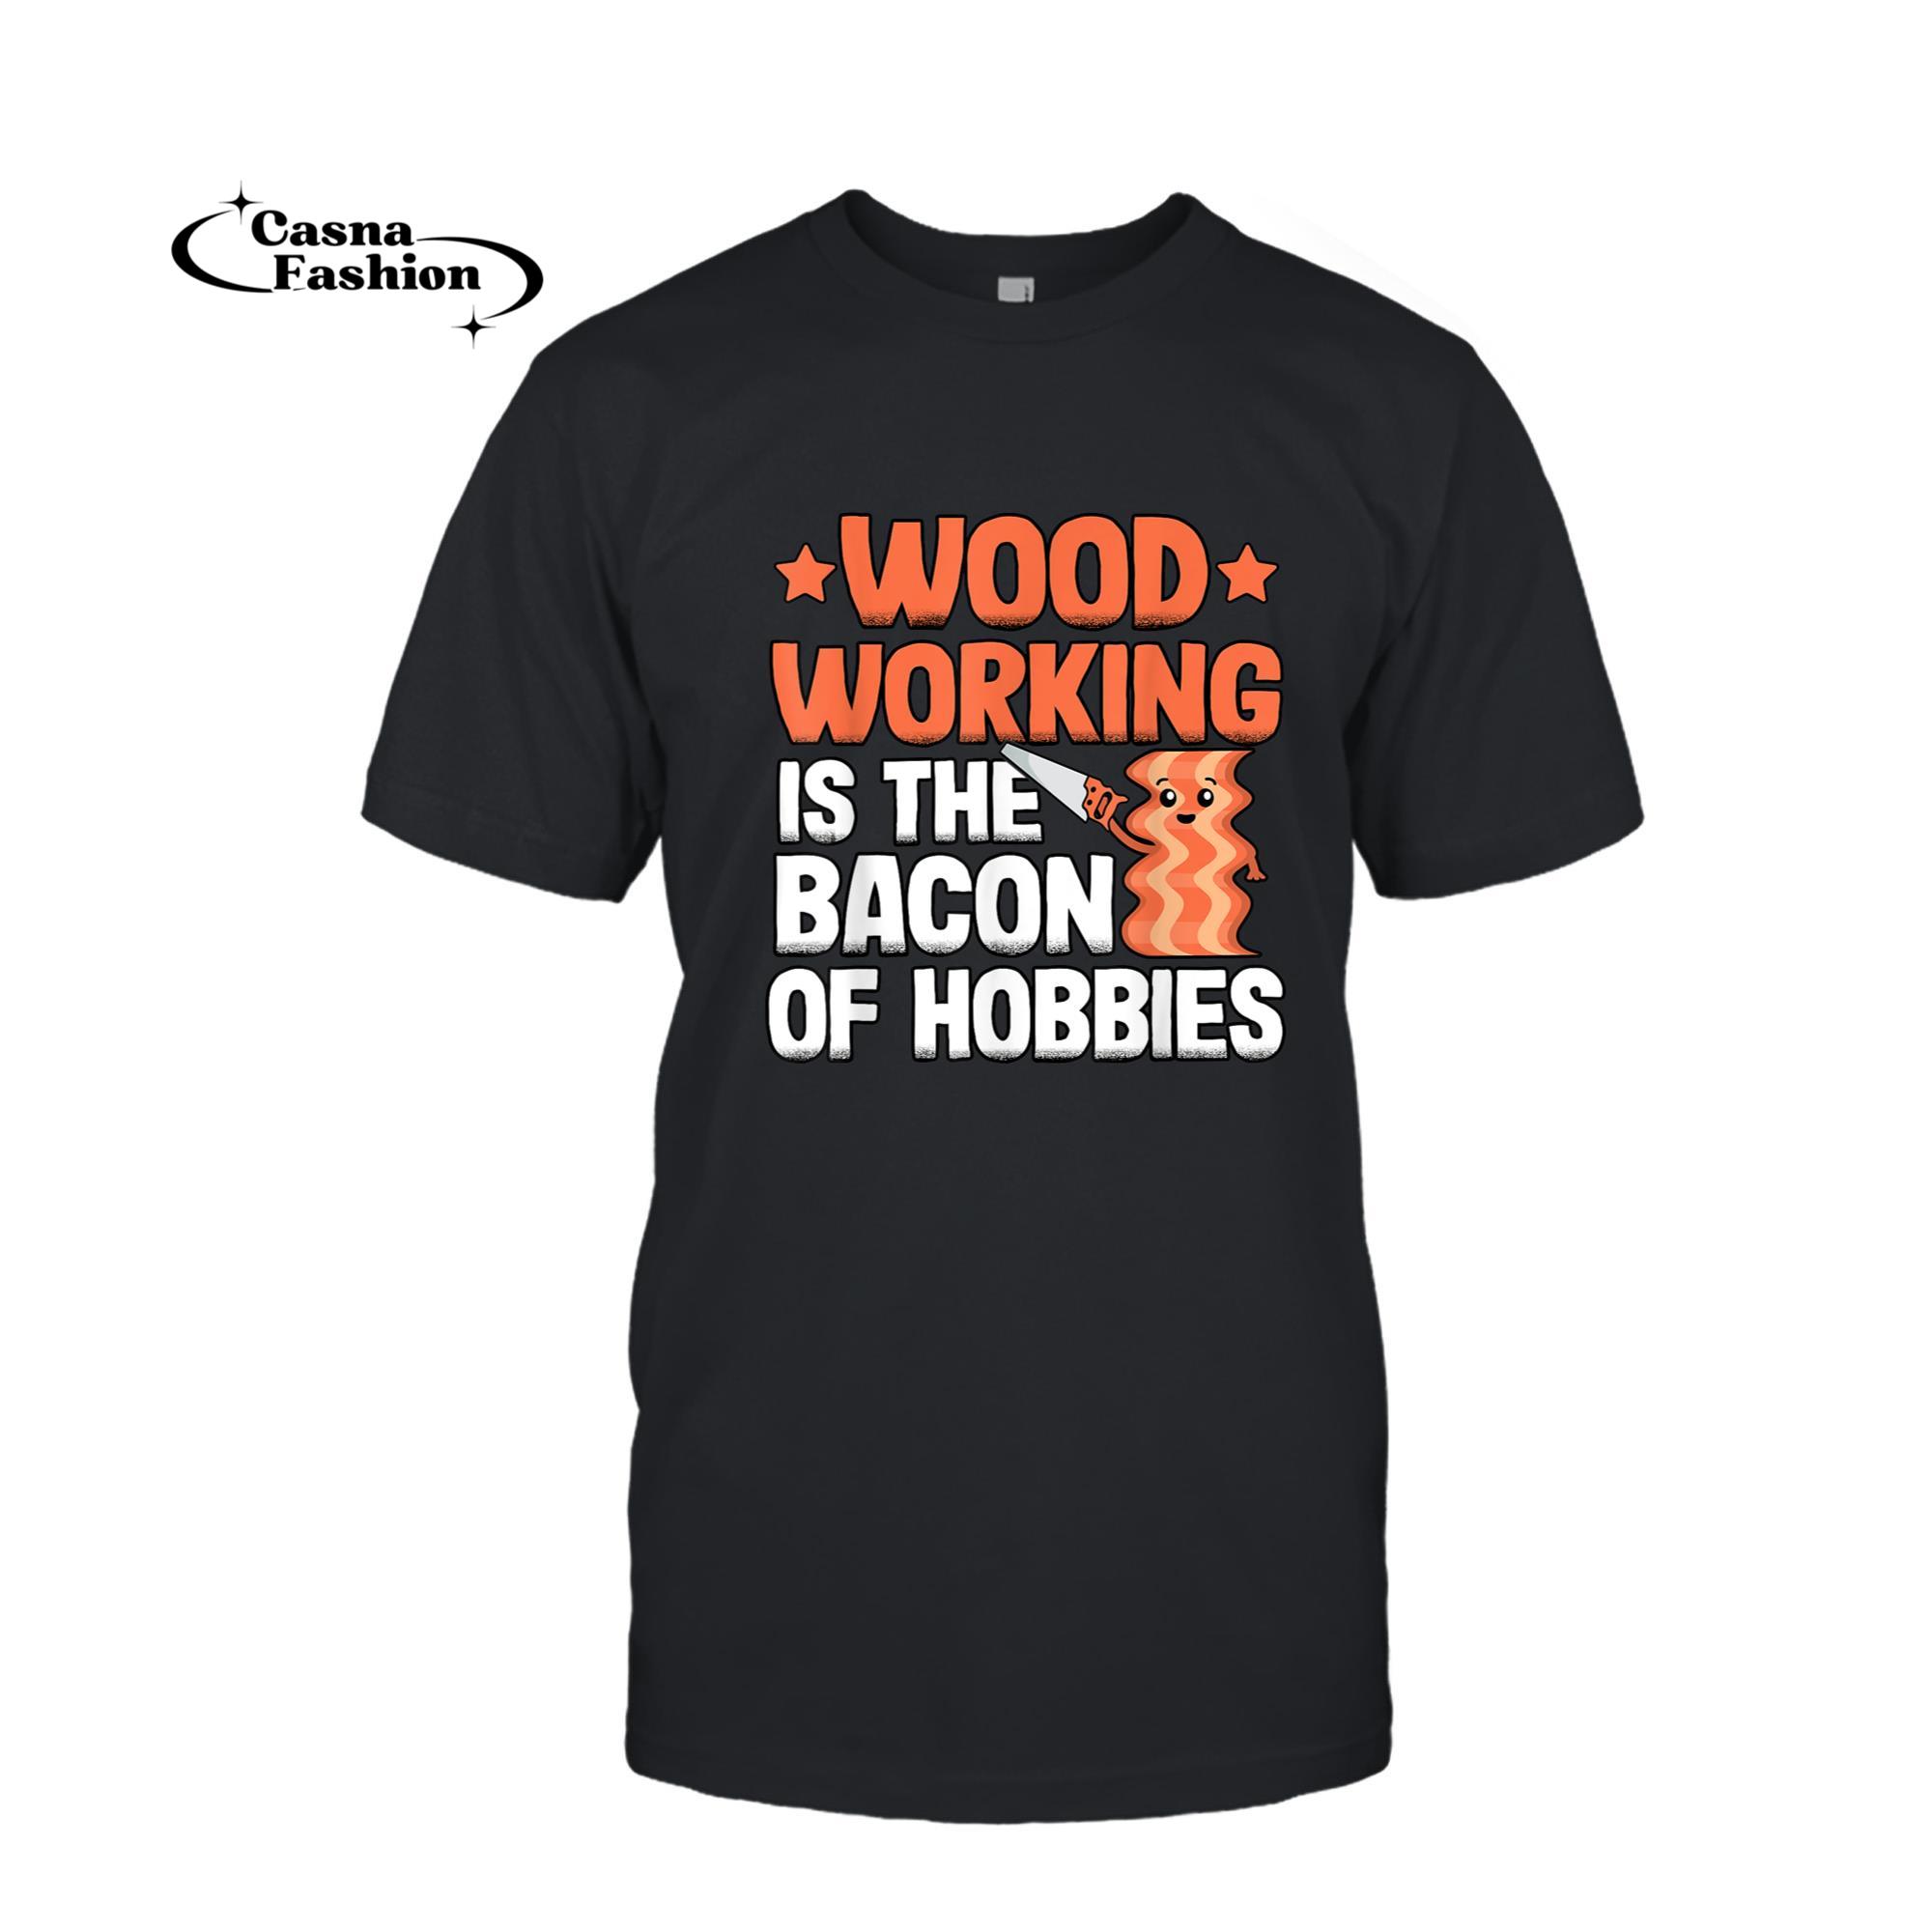 casnafashion_T-shirt_Woodworking Is The Bacon Of Hobbies Quote Funny Carpenter T-Shirt_T-shirt_Black